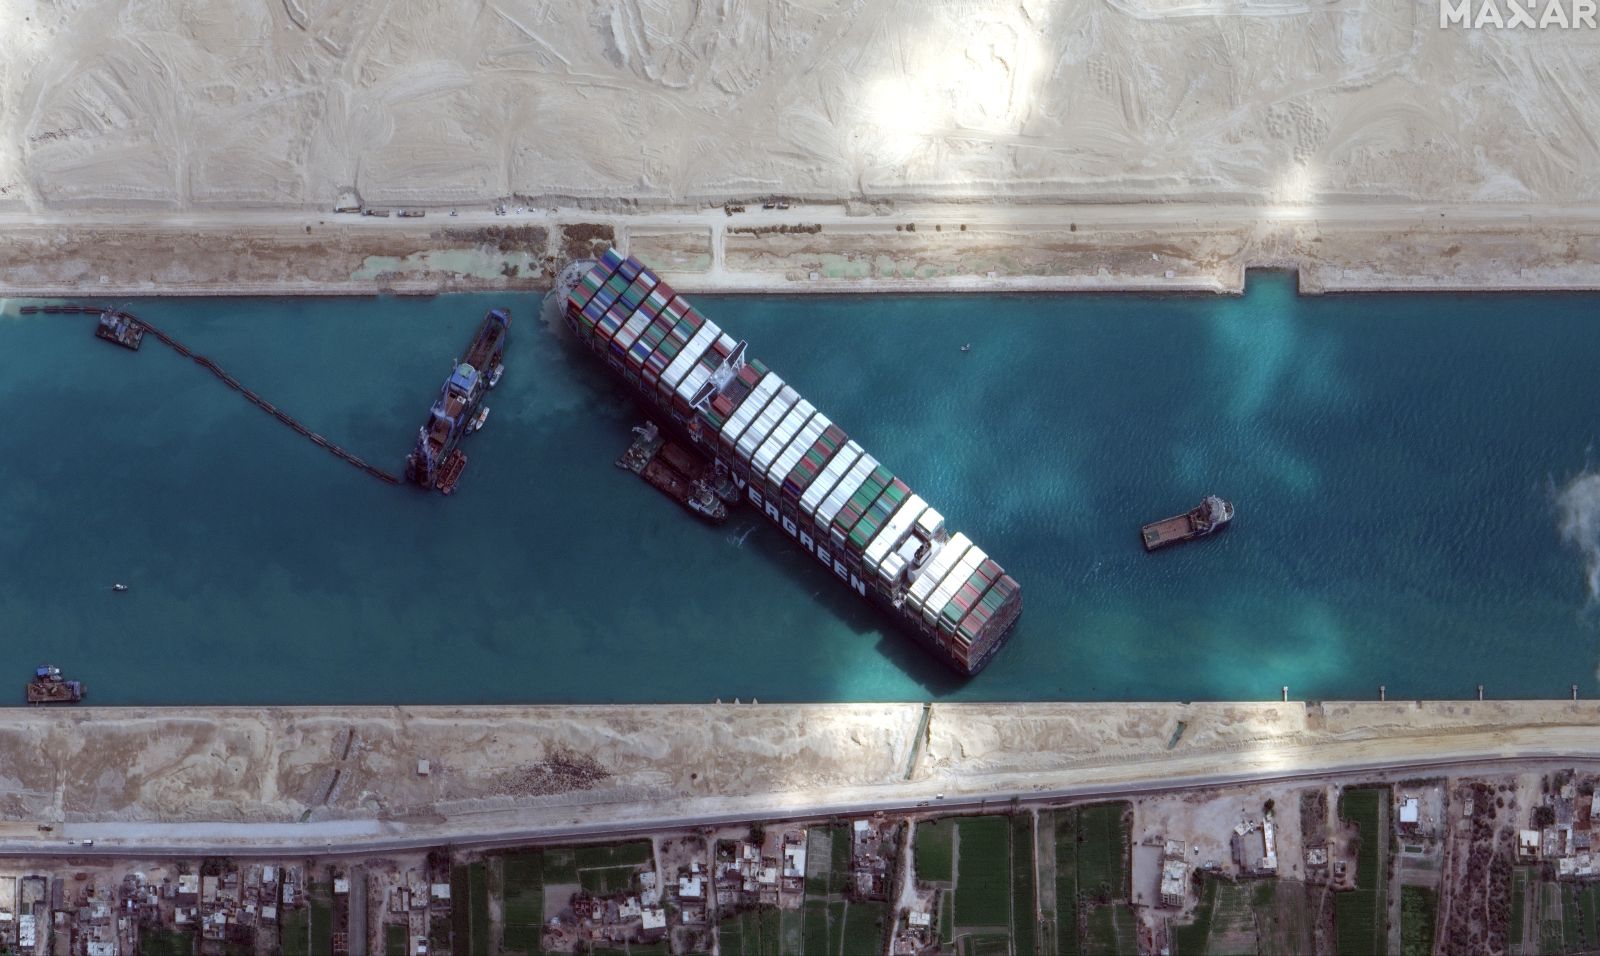 epa09103099 A handout satellite image made available by MAXAR Technologies shows excavation around the bow of the 'Ever Given' and dredging operations in progress, in the Suez Canal, Egypt, 28 March 2021. The large container ship Ever Given ran aground in the Suez Canal on 23 March, blocking passage of other ships and causing a traffic jam for cargo vessels.  EPA/MAXAR TECHNOLOGIES HANDOUT MANDATORY CREDIT: SATELLITE IMAGE 2020 MAXAR TECHNOLOGIES -- the watermark may not be removed/cropped -- HANDOUT EDITORIAL USE ONLY/NO SALES